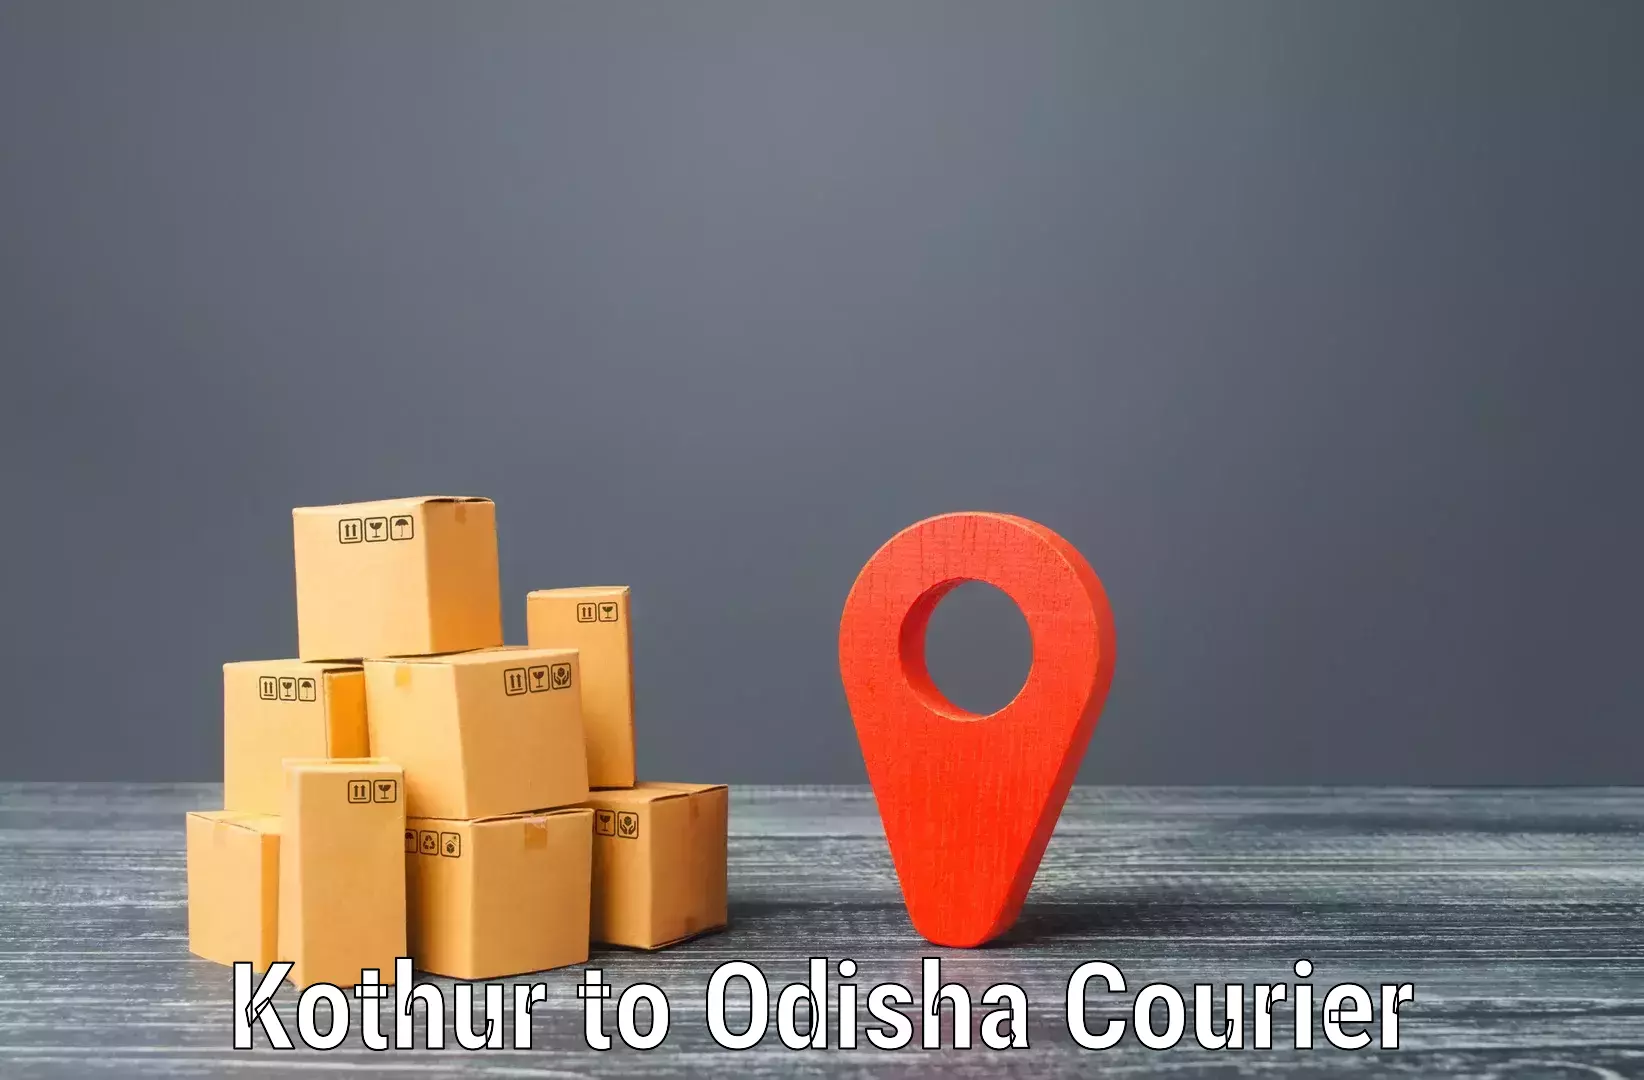 Local delivery service Kothur to Phulbani